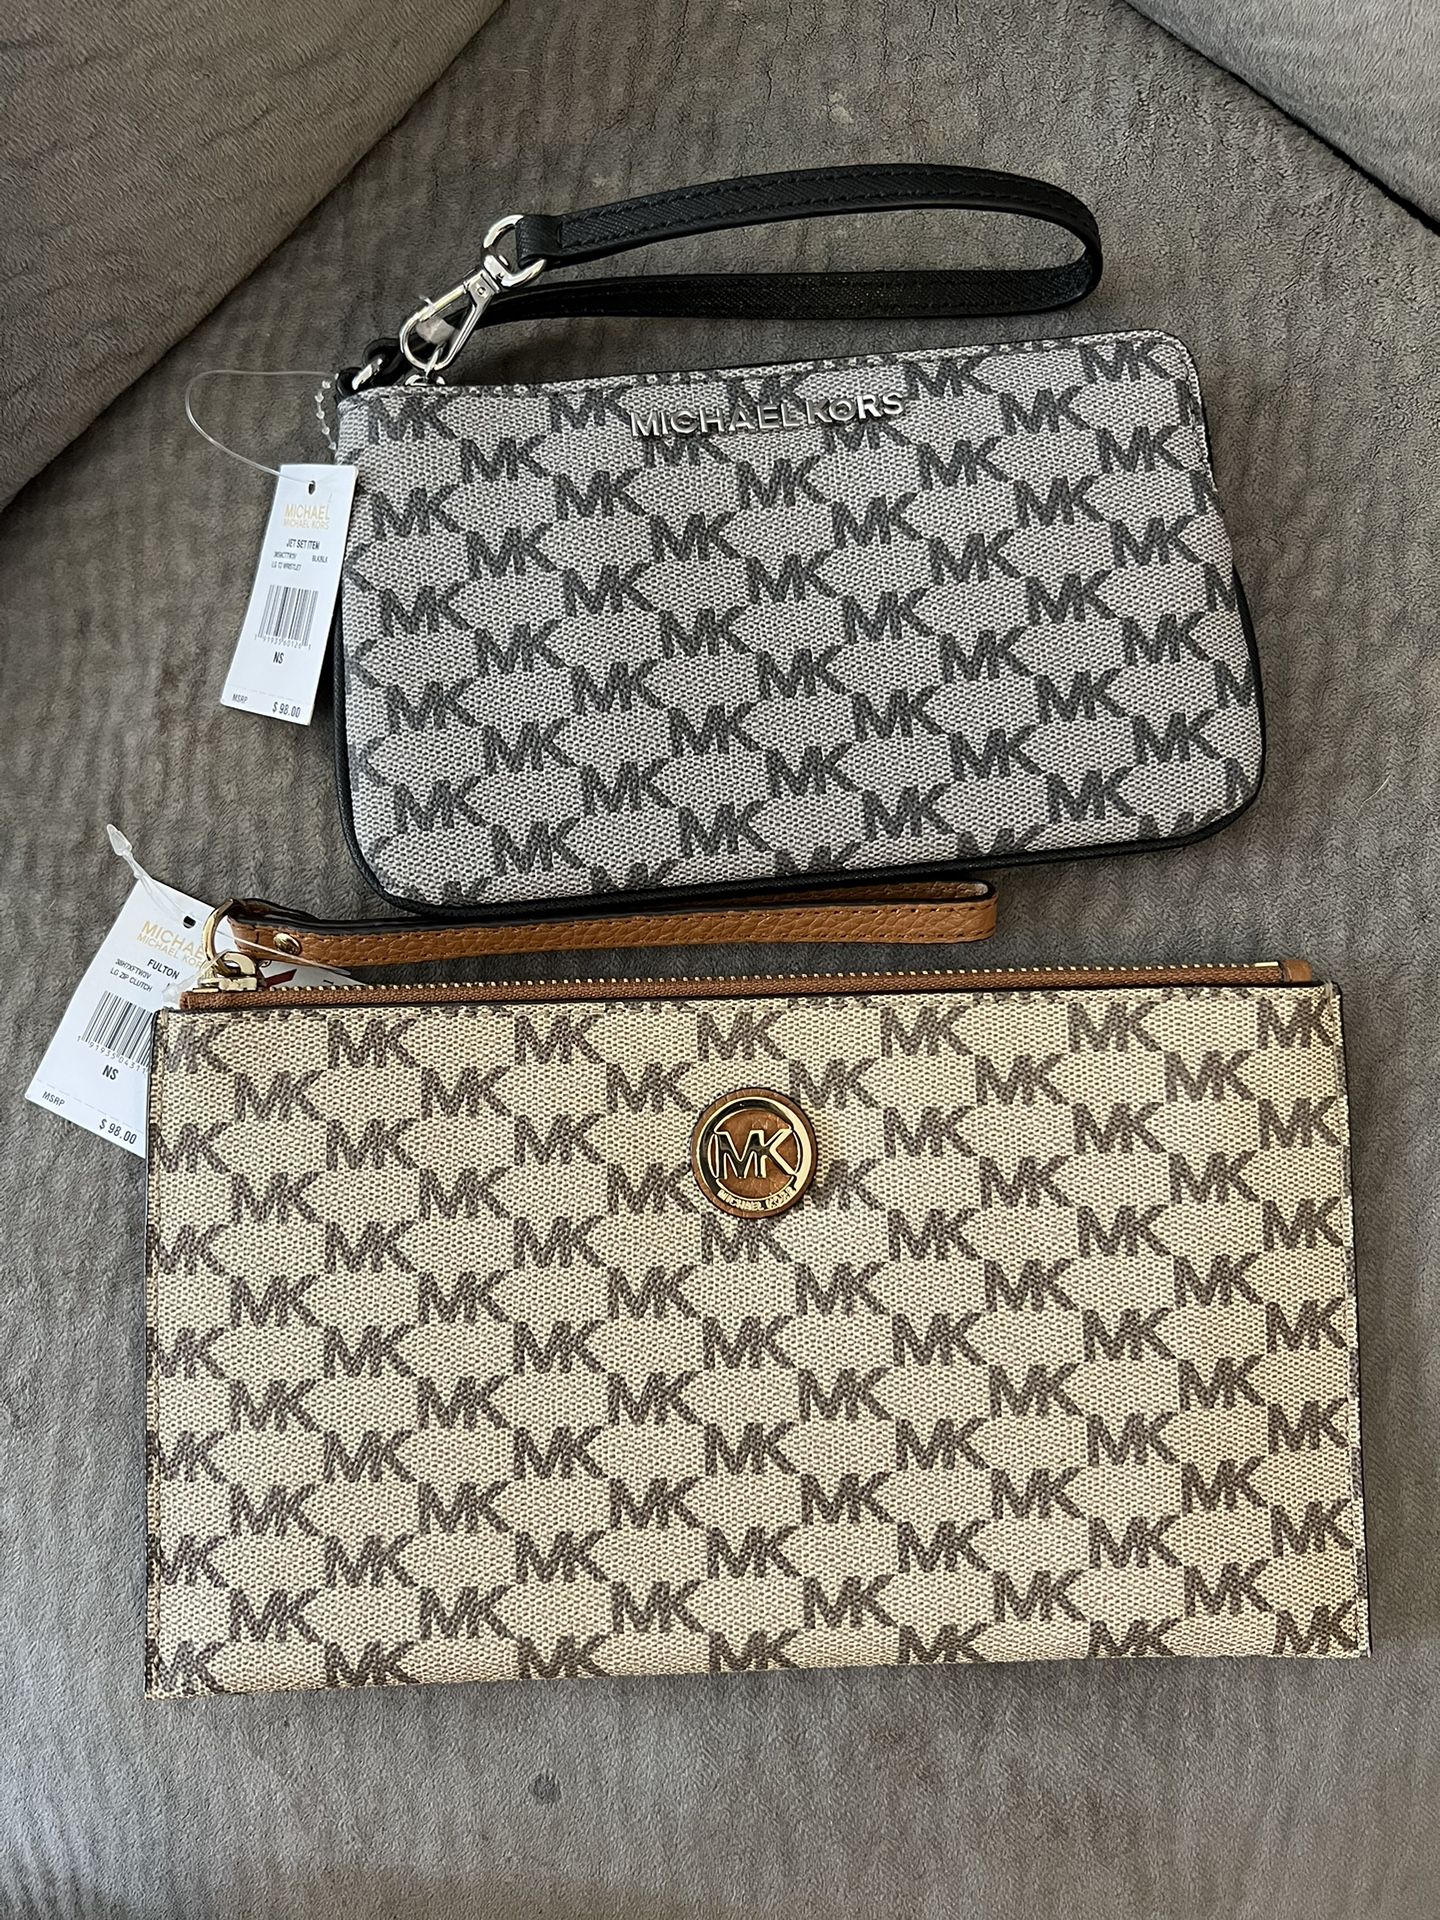 Brand New Michael Kors Wristlets - $45 each or 2 for $87 - PICKUP IN AIEA - I DON’T DELIVER - PRICE IS FIRM - LOW BALLERS WILL BE BLOCKED 